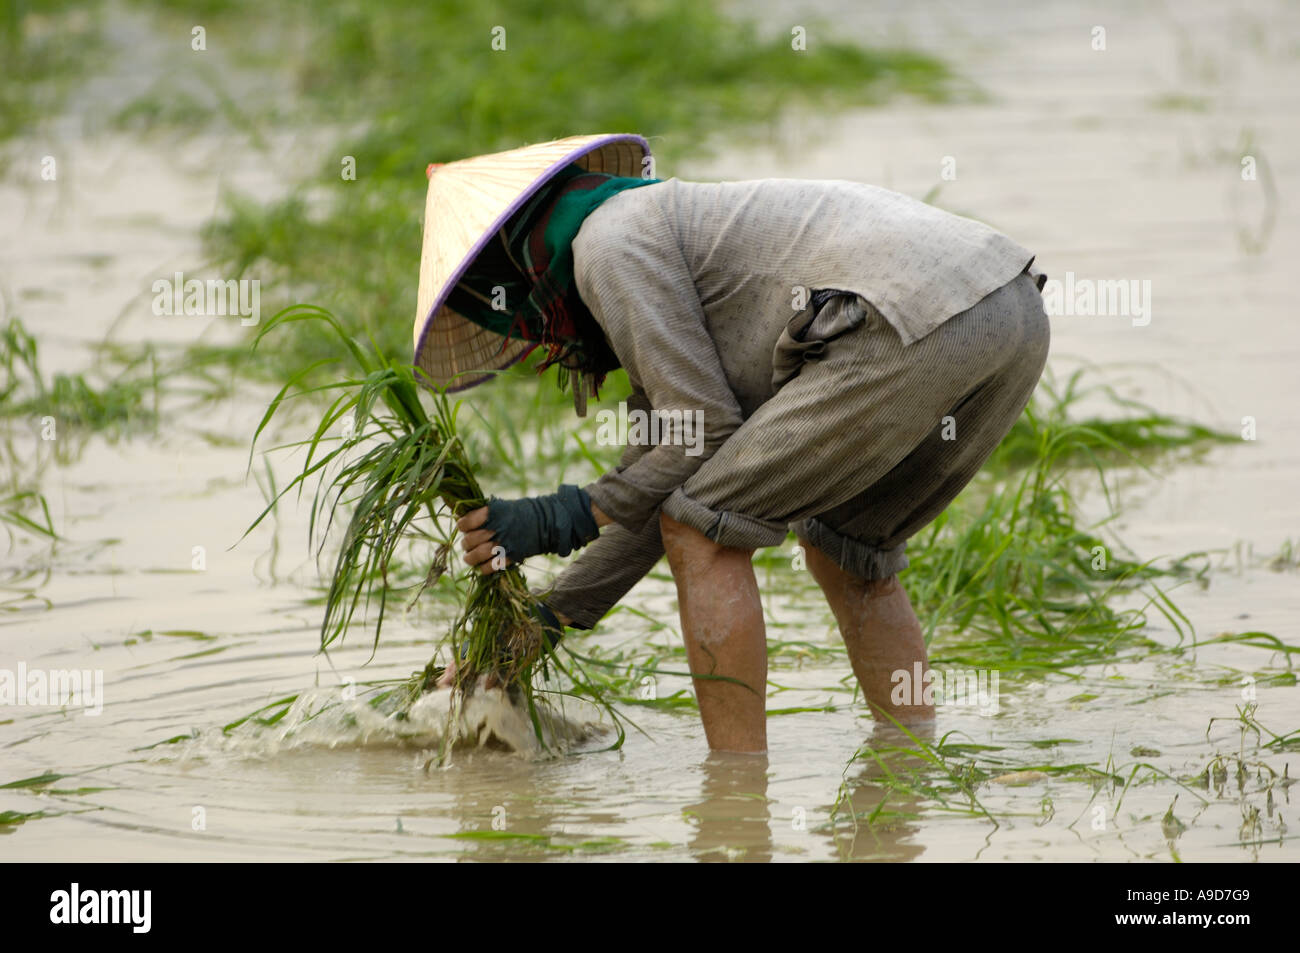 A woman transplants rice seedlings in a village of Sanya Hainan China March 29 2006 Stock Photo